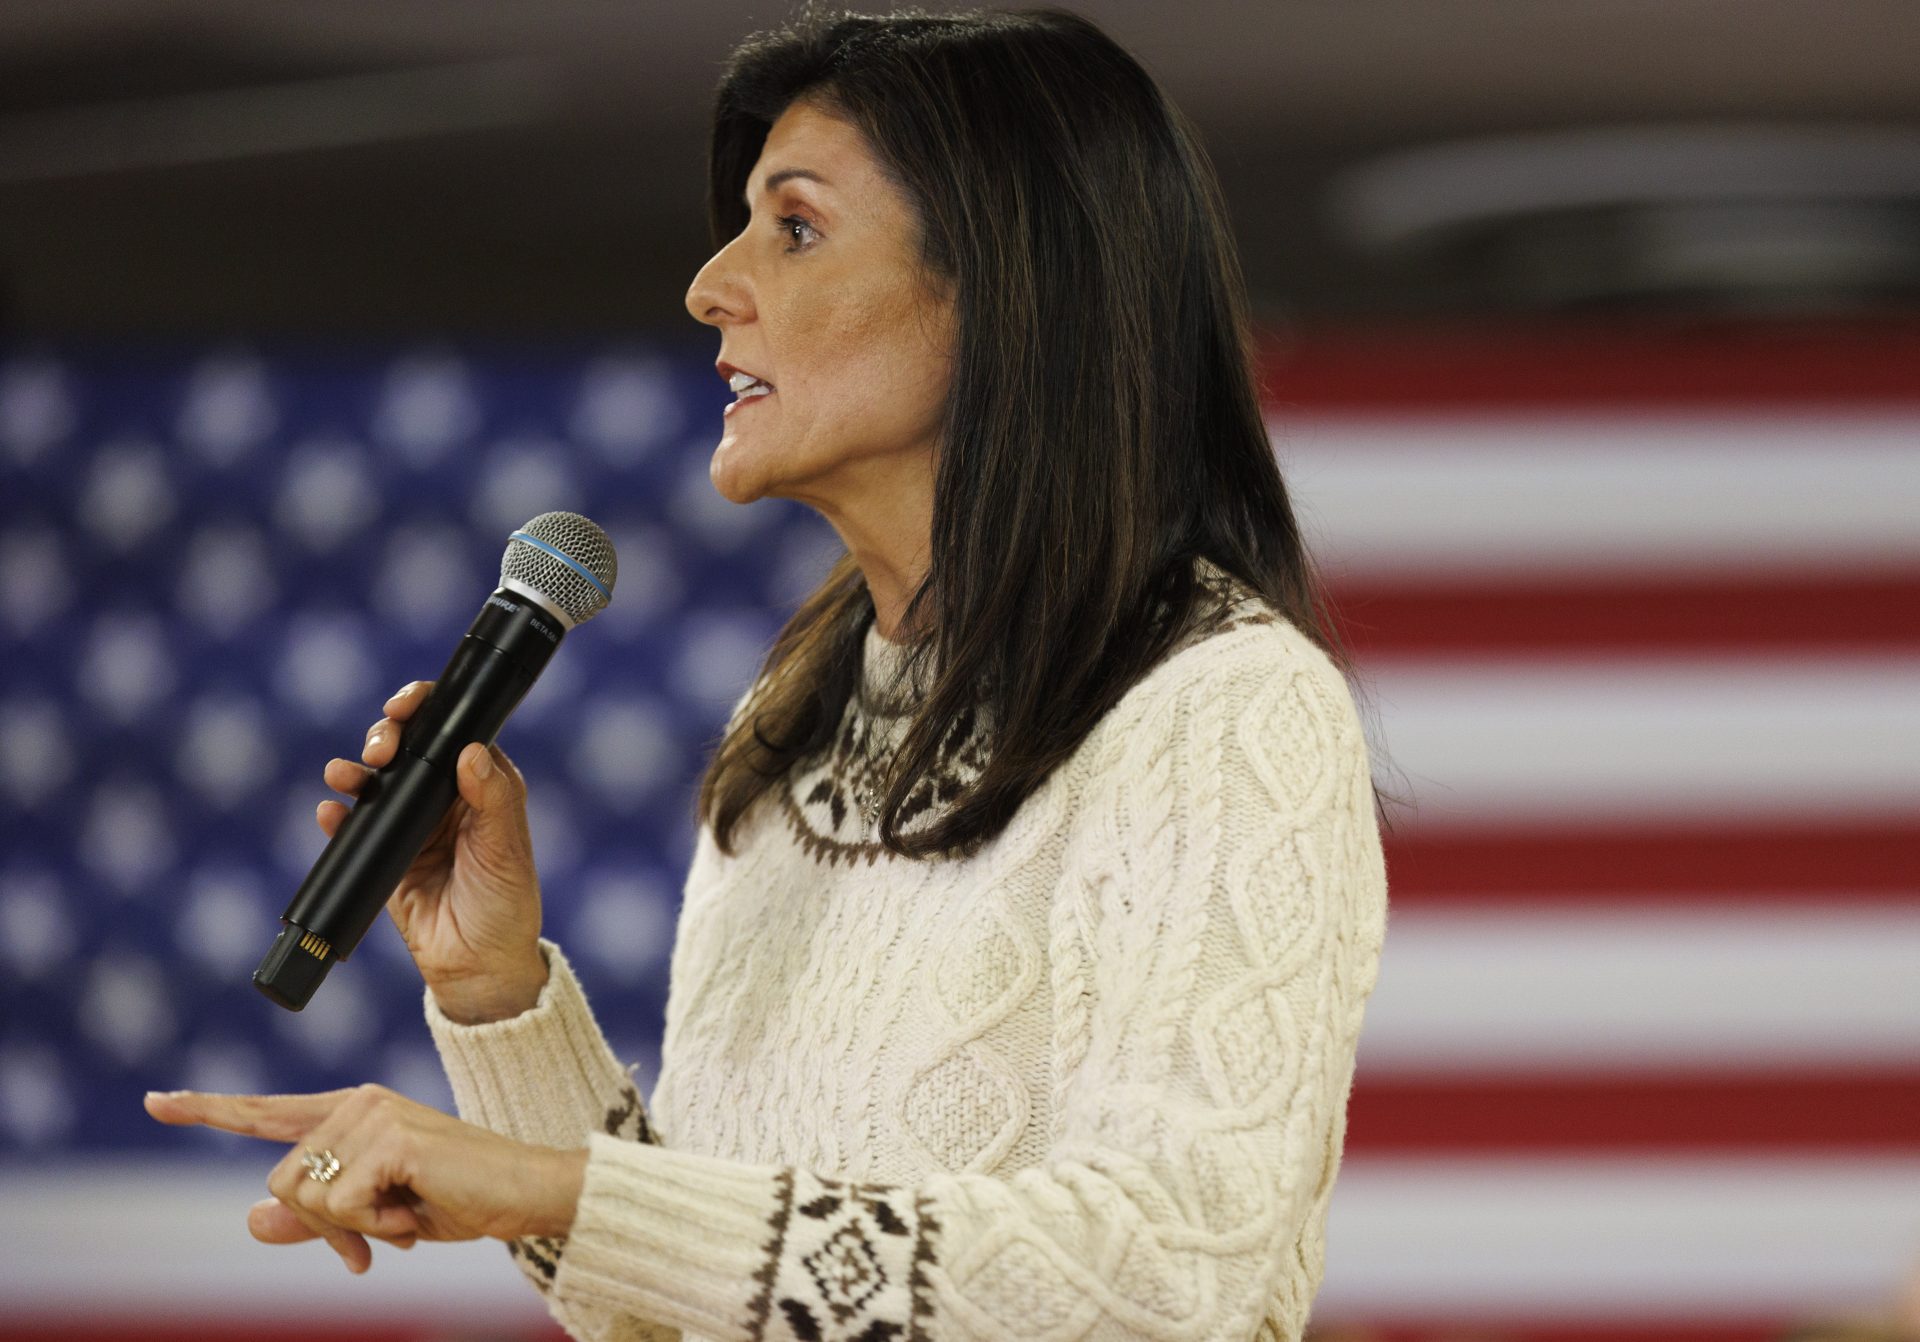 Haley accuses DeSantis of being an 